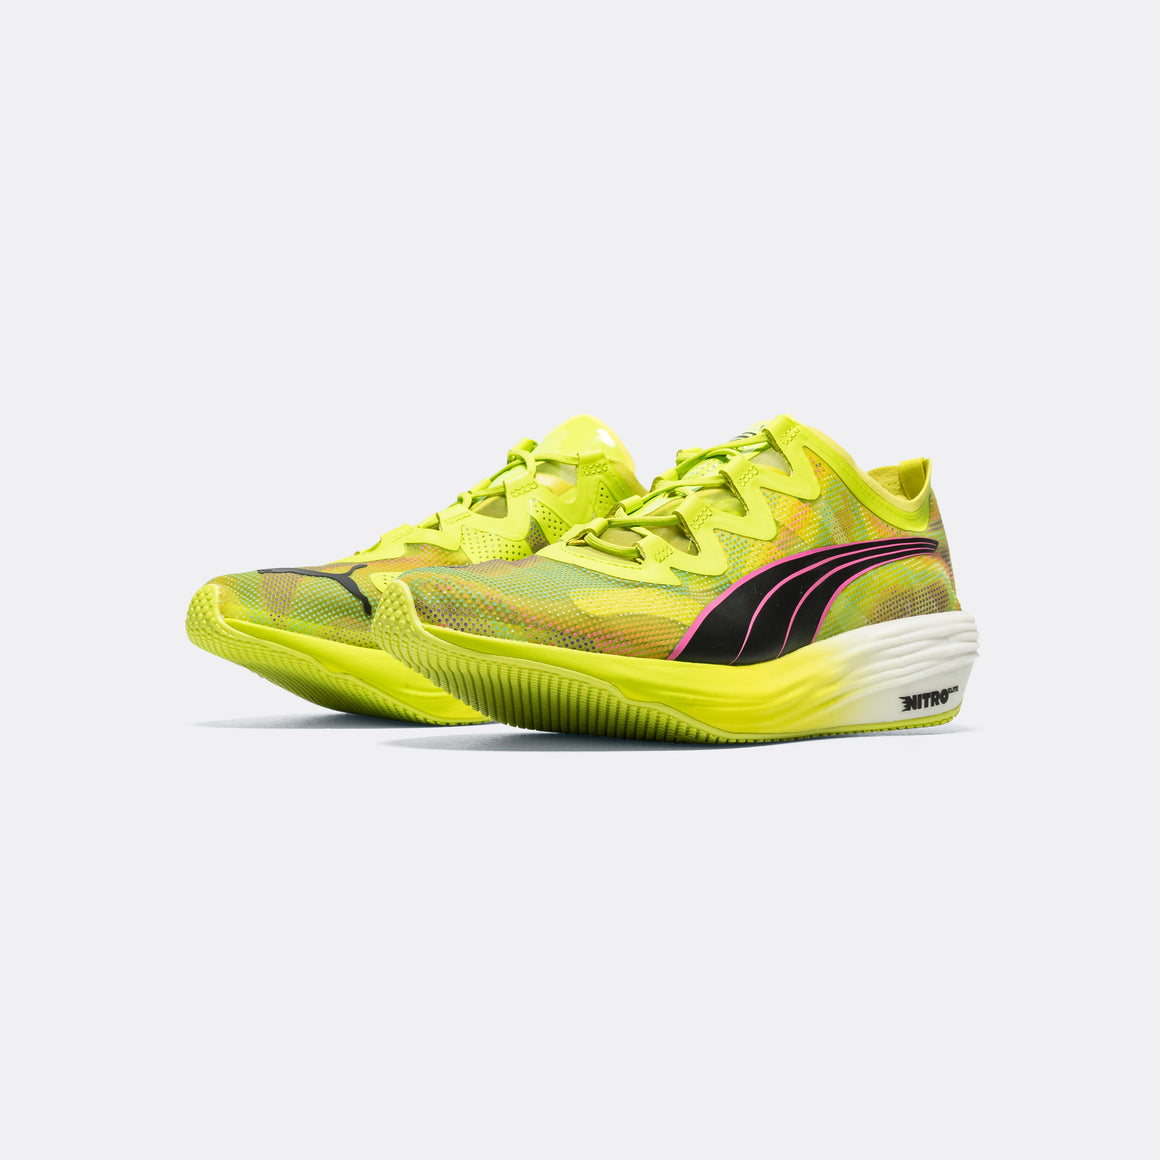 Puma - Womens Fast-FWD NITRO Elite - Psychedelic Rush/Lime - Up There Athletics